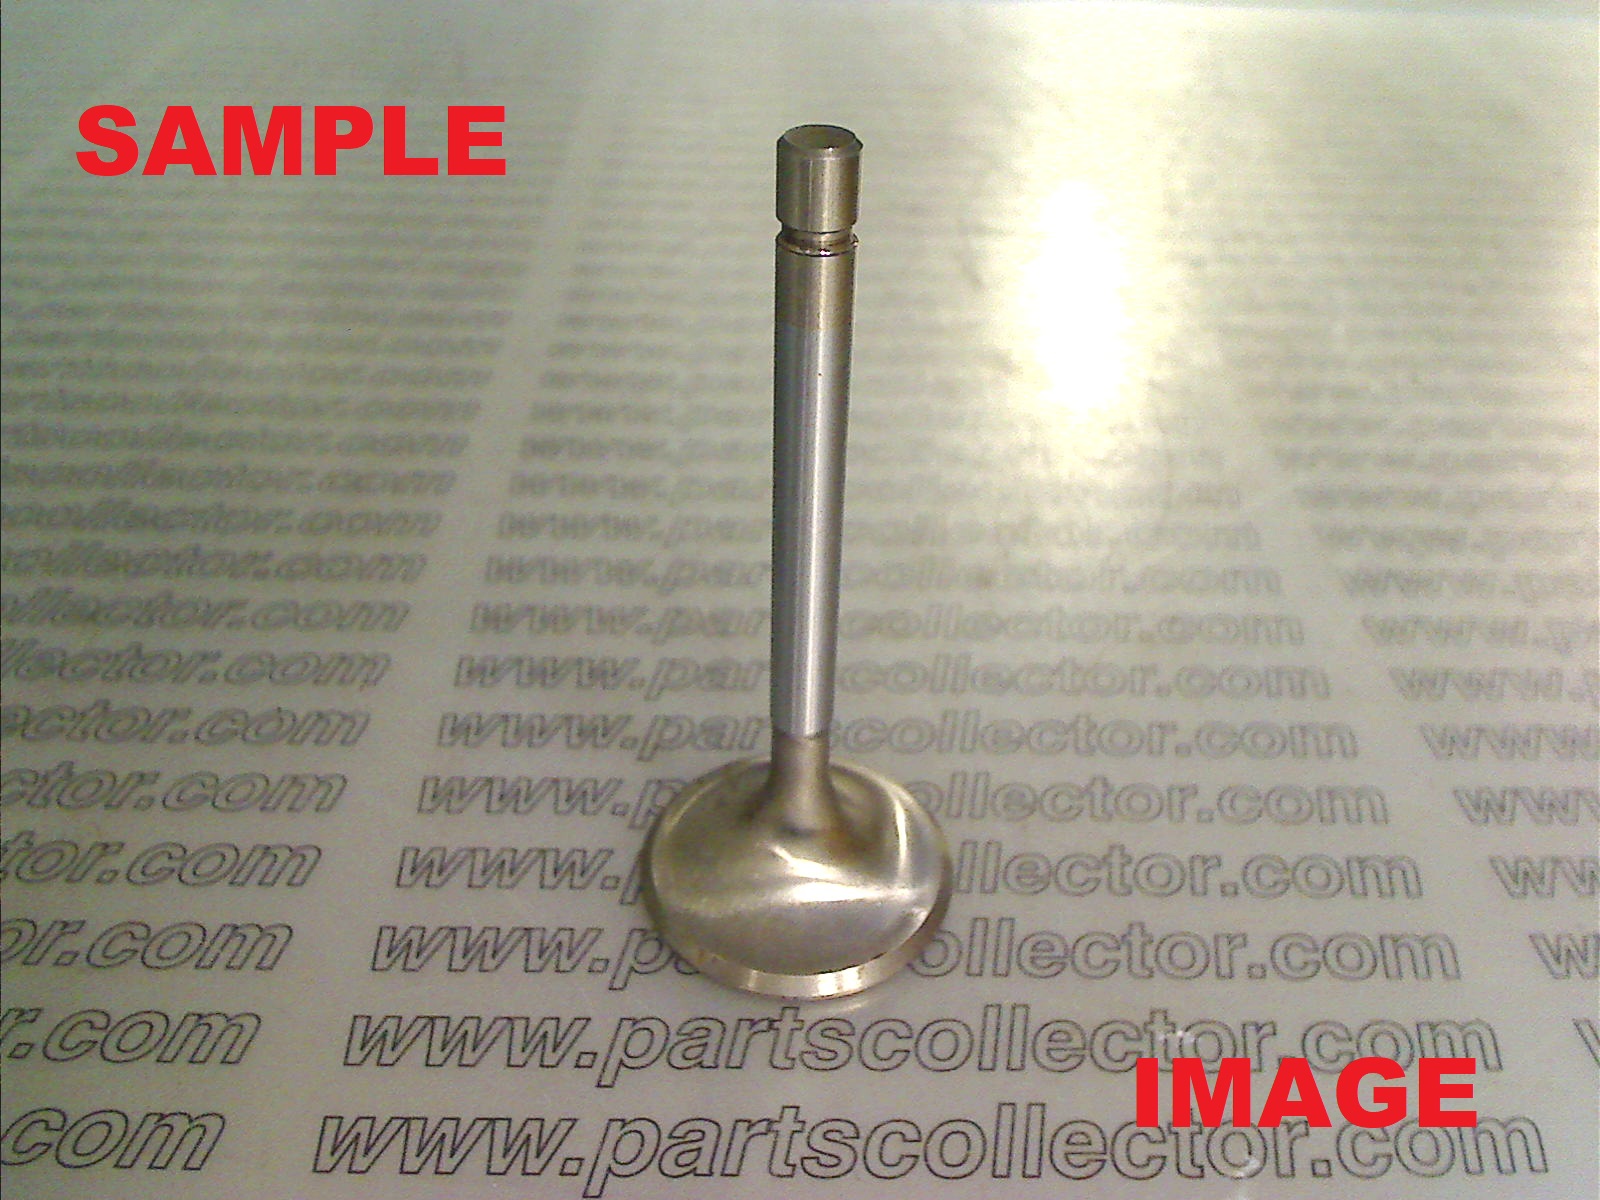 SET OF EXHAUST AND INTAKE VALVES